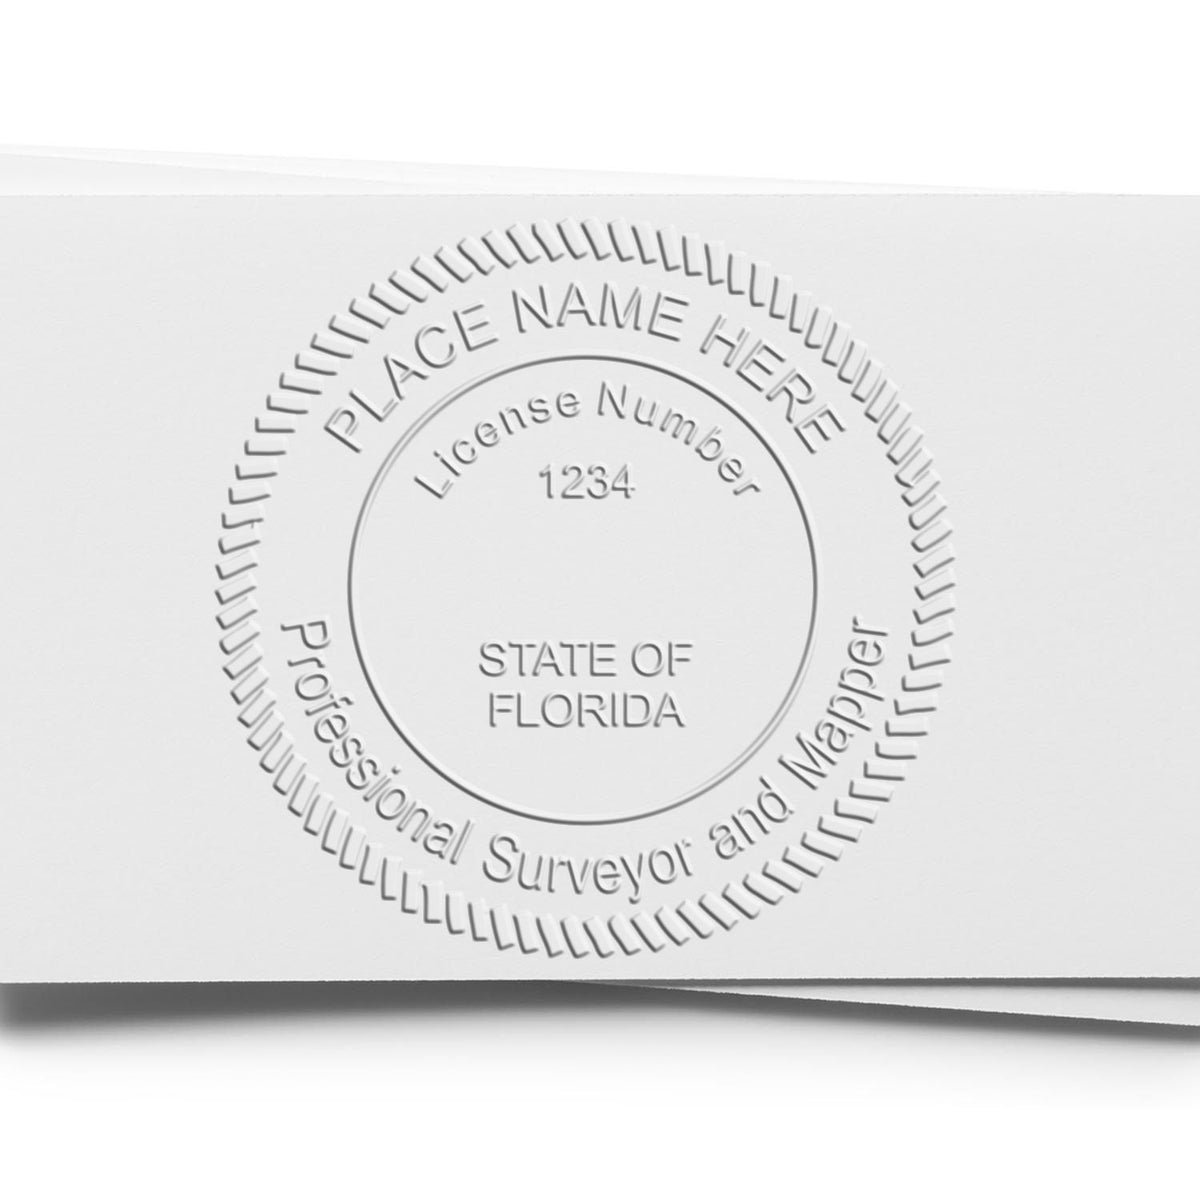 A photograph of the State of Florida Soft Land Surveyor Embossing Seal stamp impression reveals a vivid, professional image of the on paper.